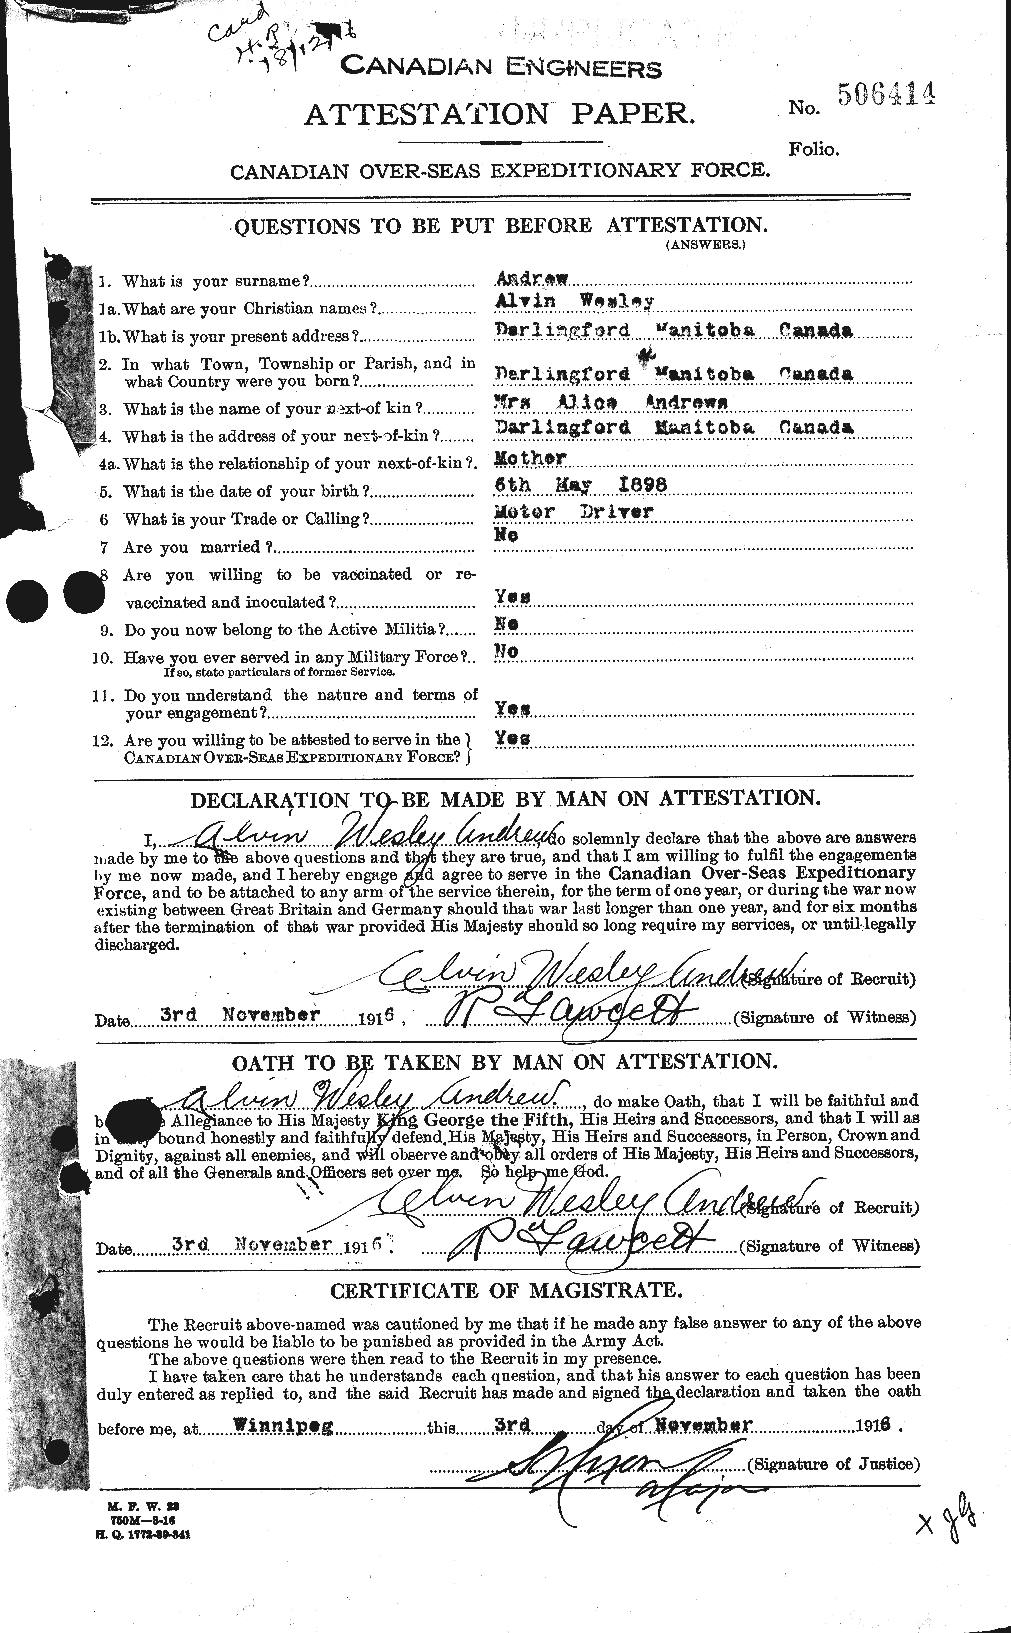 Personnel Records of the First World War - CEF 210949a